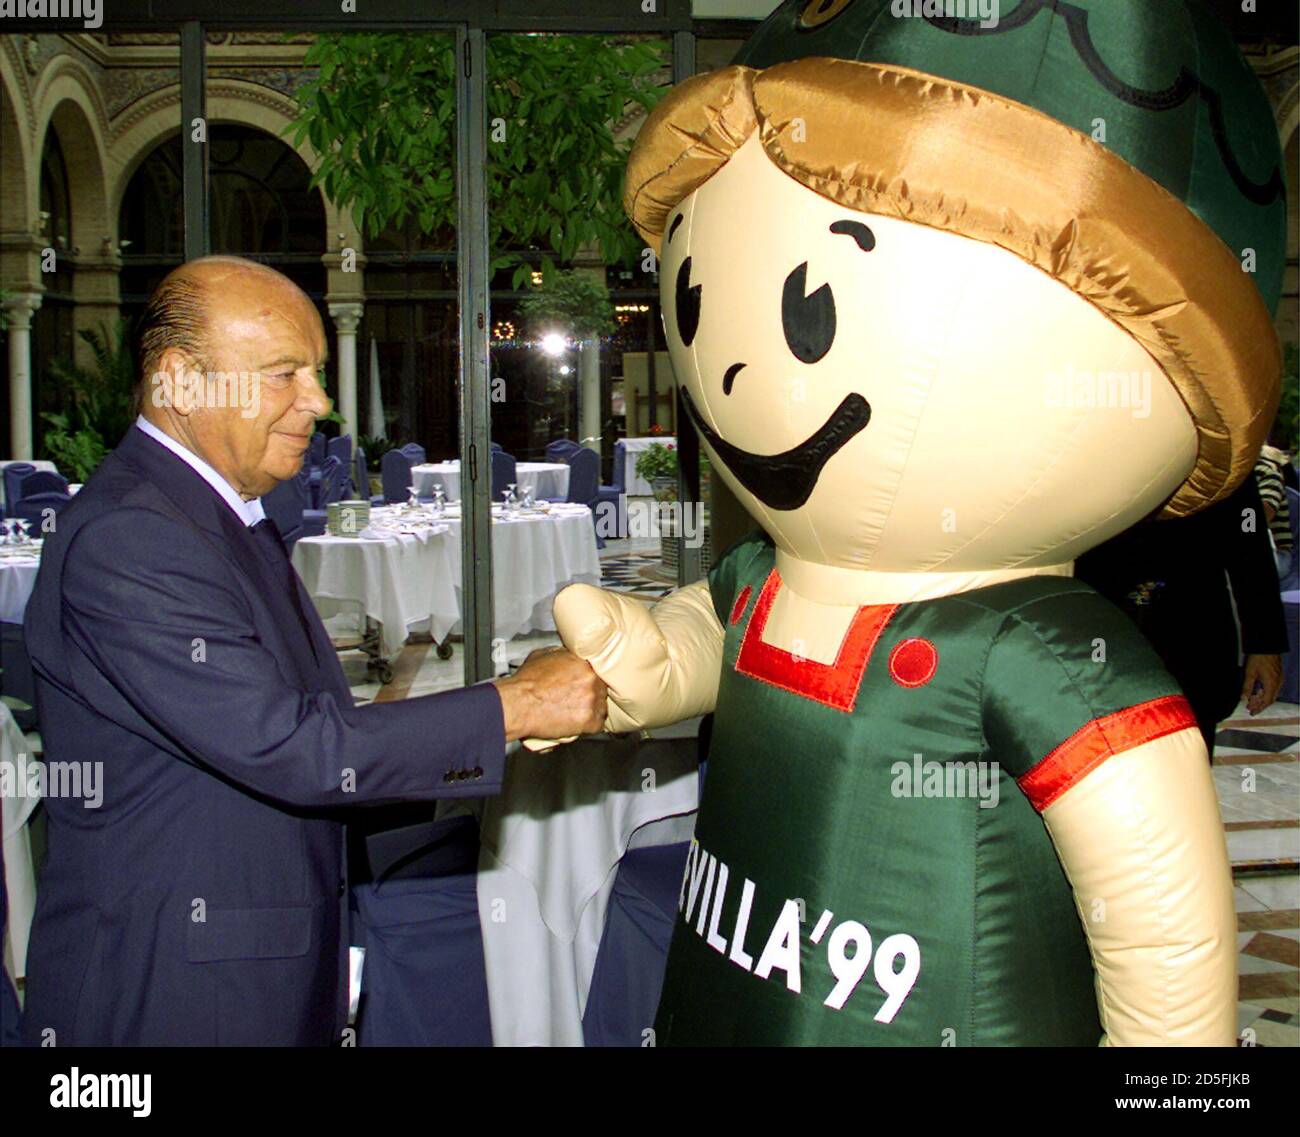 IAAF President Primo Nebiolo is greeted by 'Giraldilla', the mascot for the Seville '99 World Athletics championships, upon arriving at a Seville hotel for an IAAF meeting August 16. The seventh IAAF world championships will take place in Seville from August 21 to 29. **DIGITAL IMAGE** Stock Photo